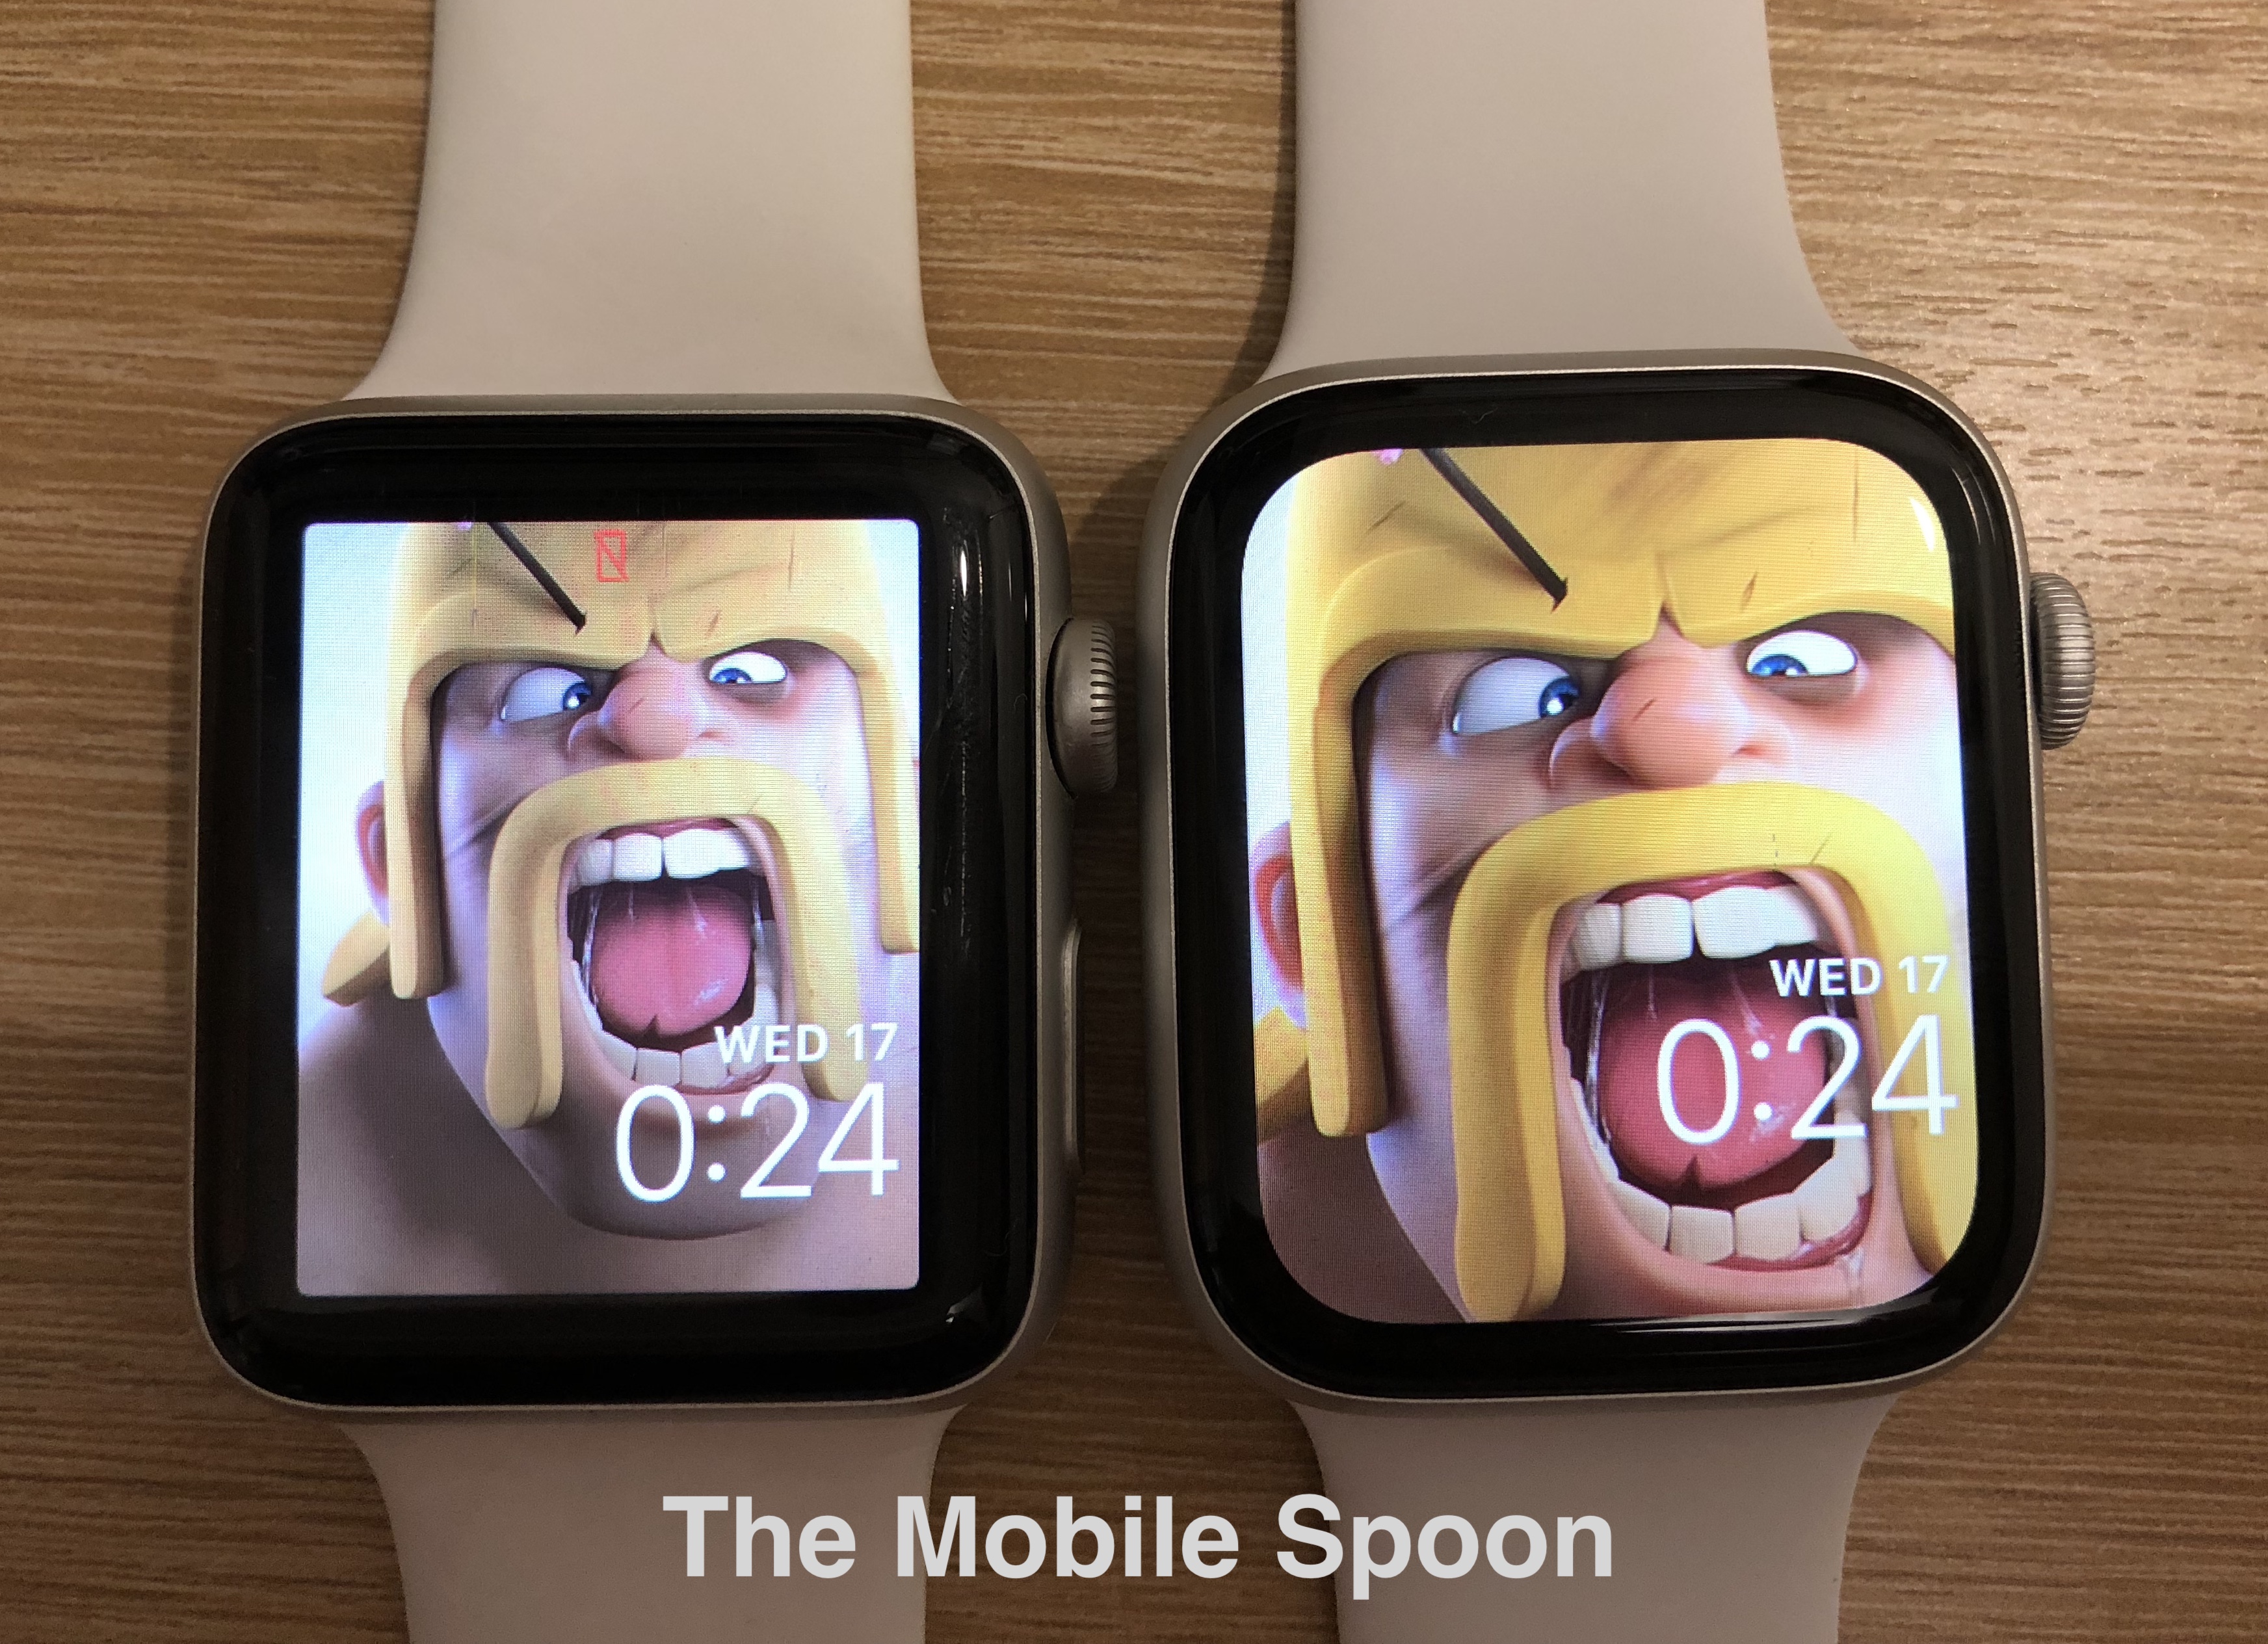 Differences between Apple Watch 4 and Apple Watch 3